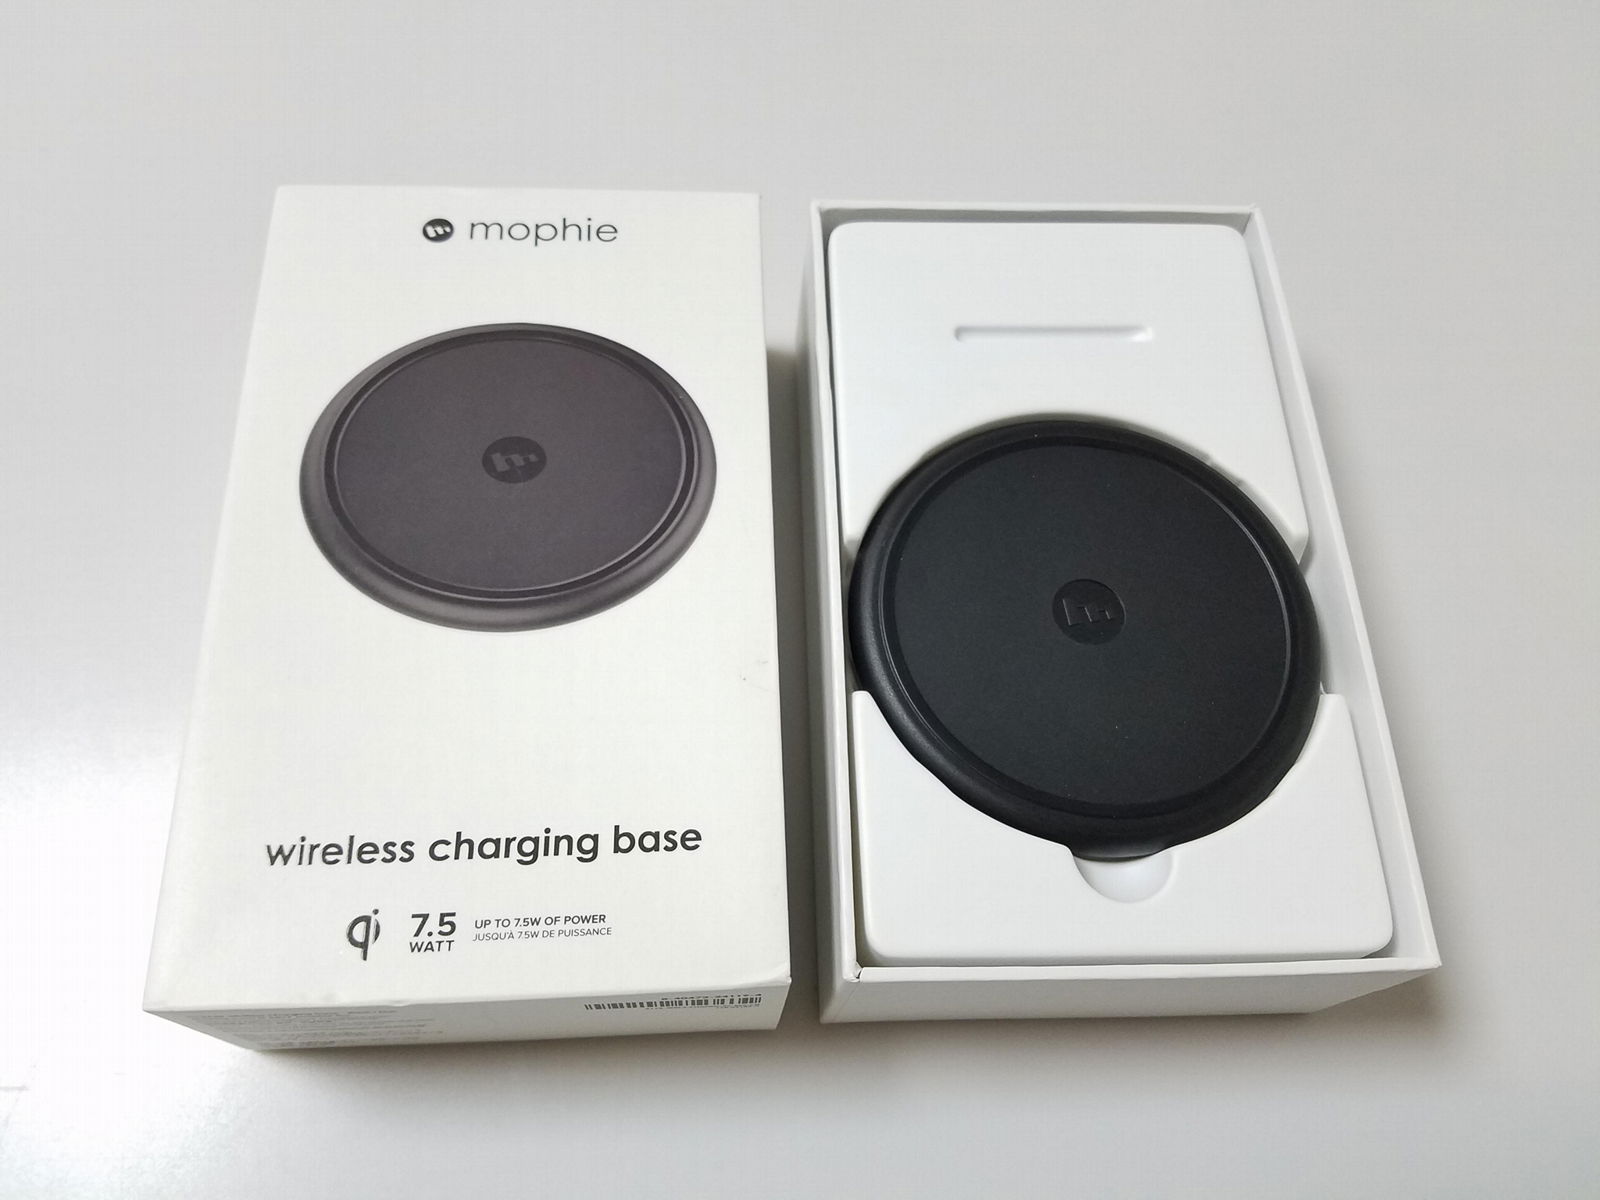 Mophie Universal Wireless Charging Base - 7.5w Fast Charging